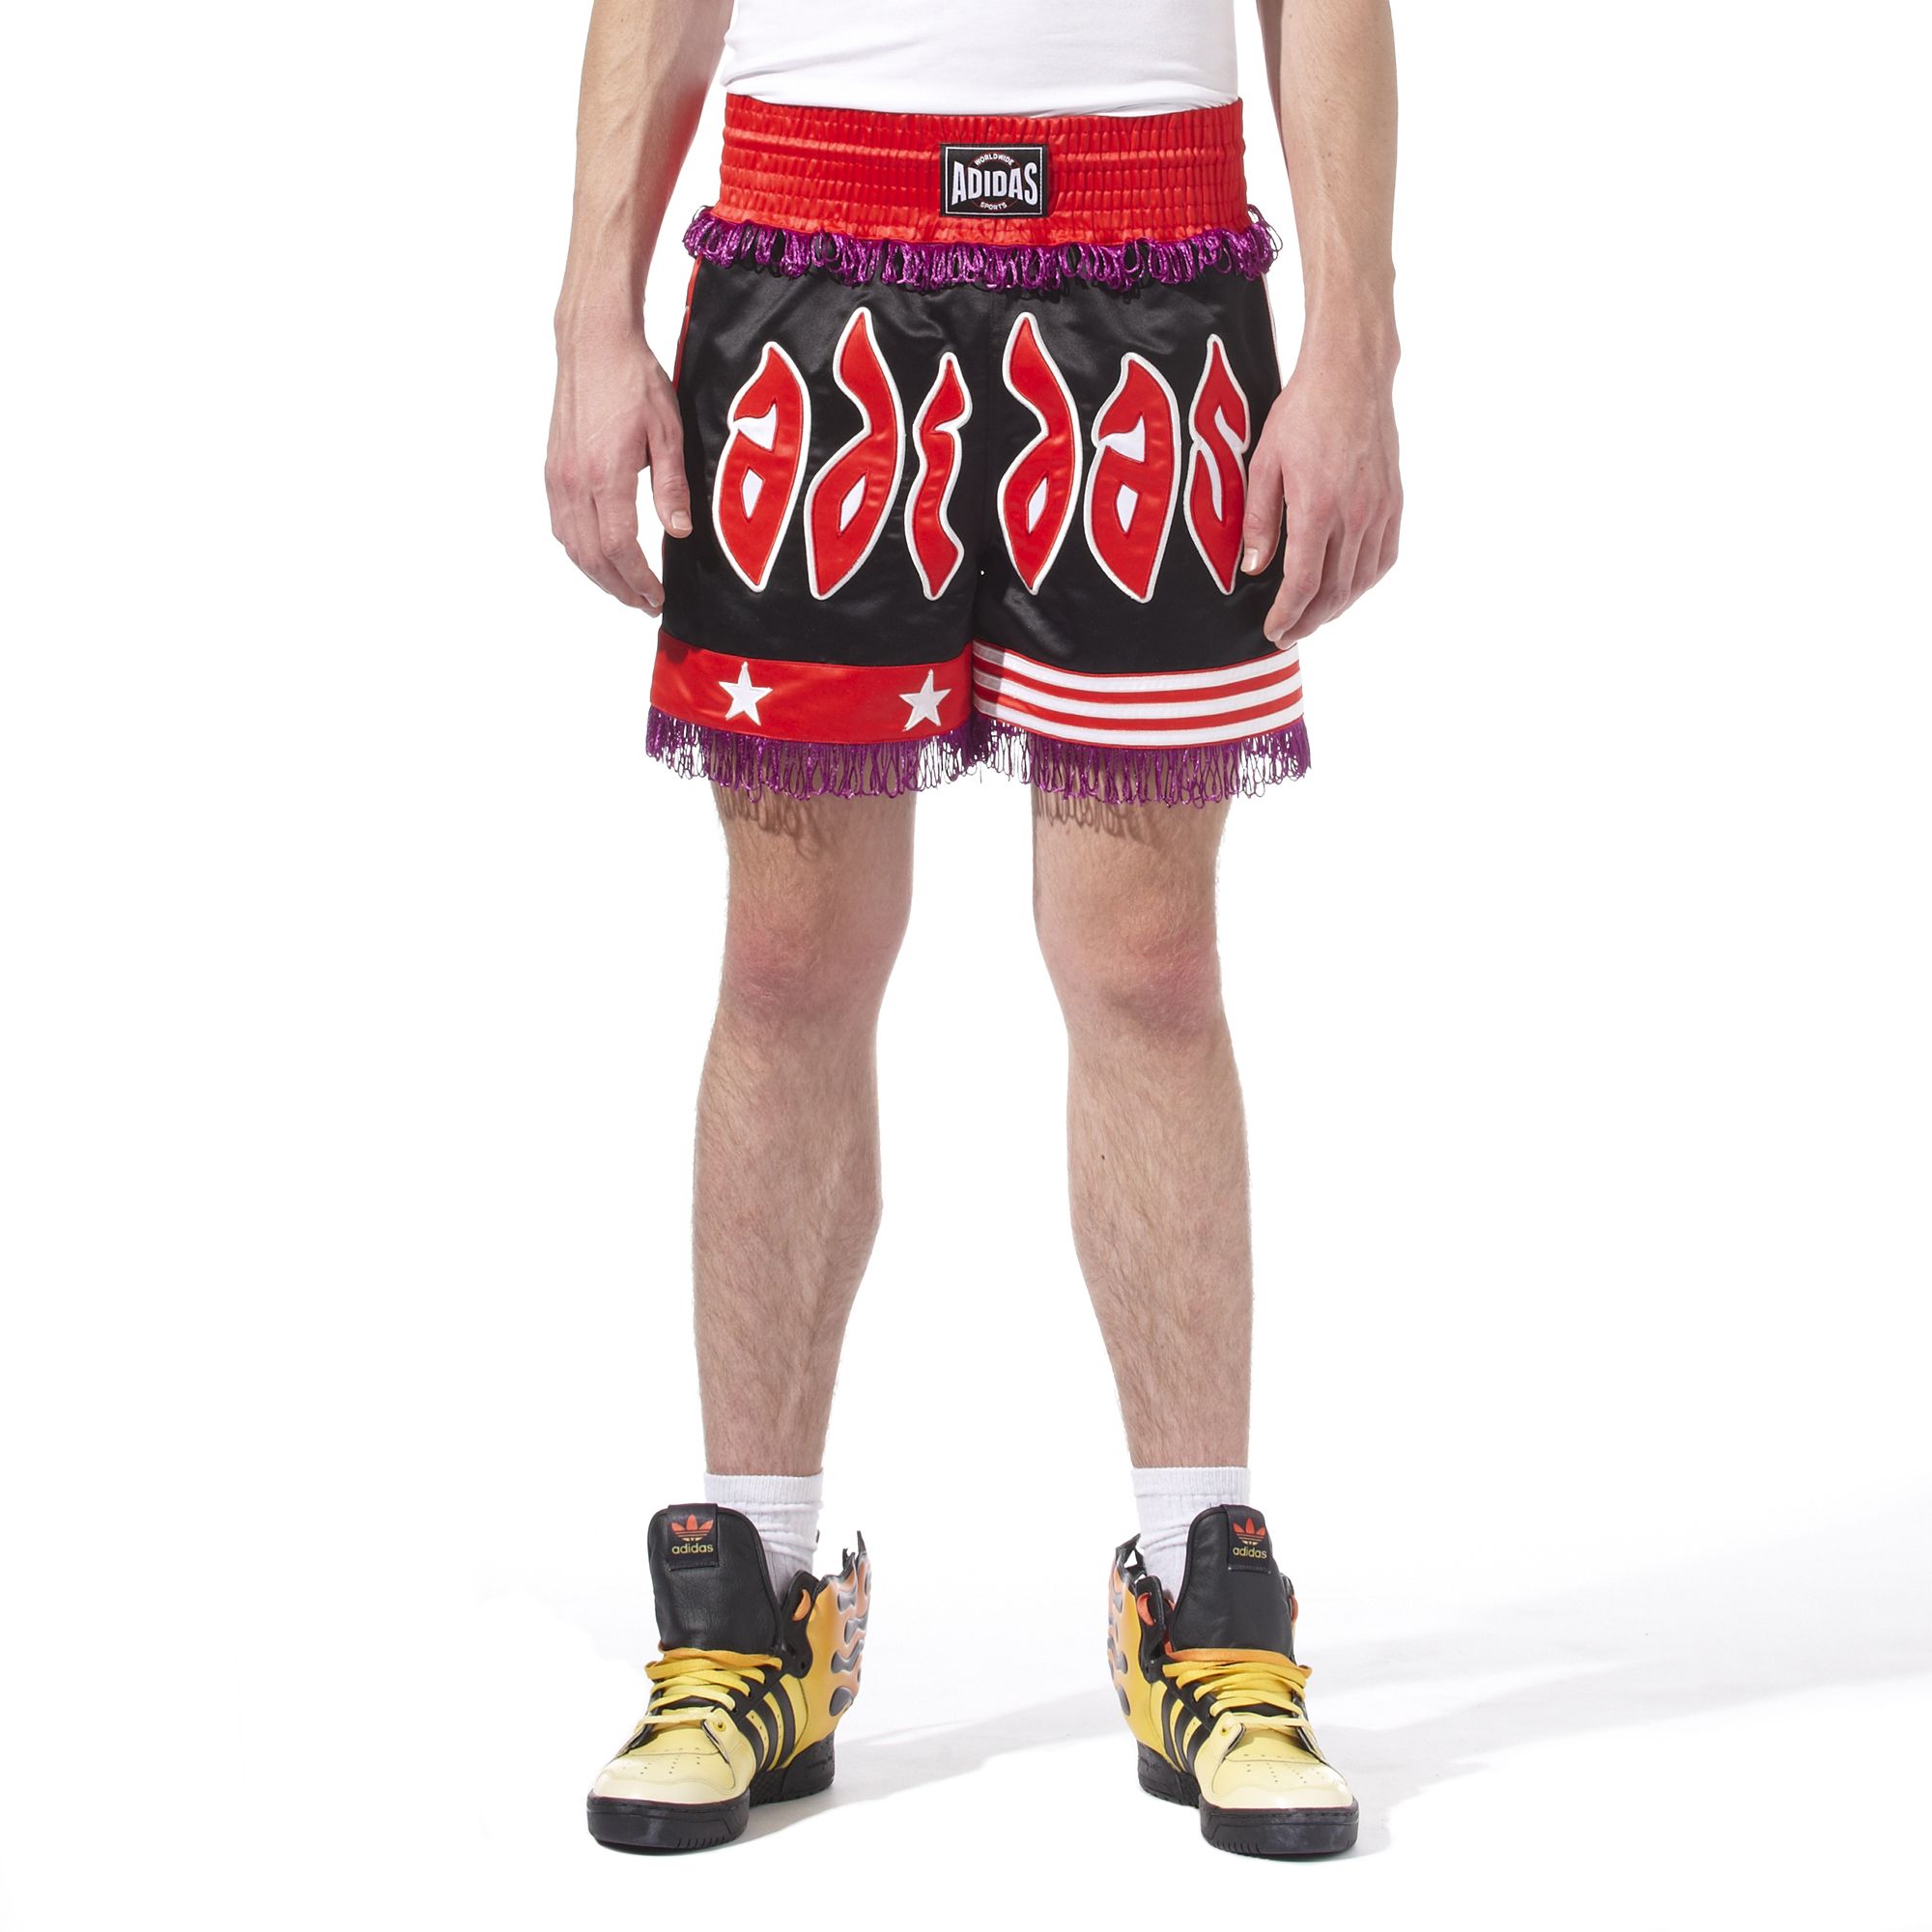 Jeremy Scott for adidas Thai Boxing Shorts in Black (Red) for Men - Lyst